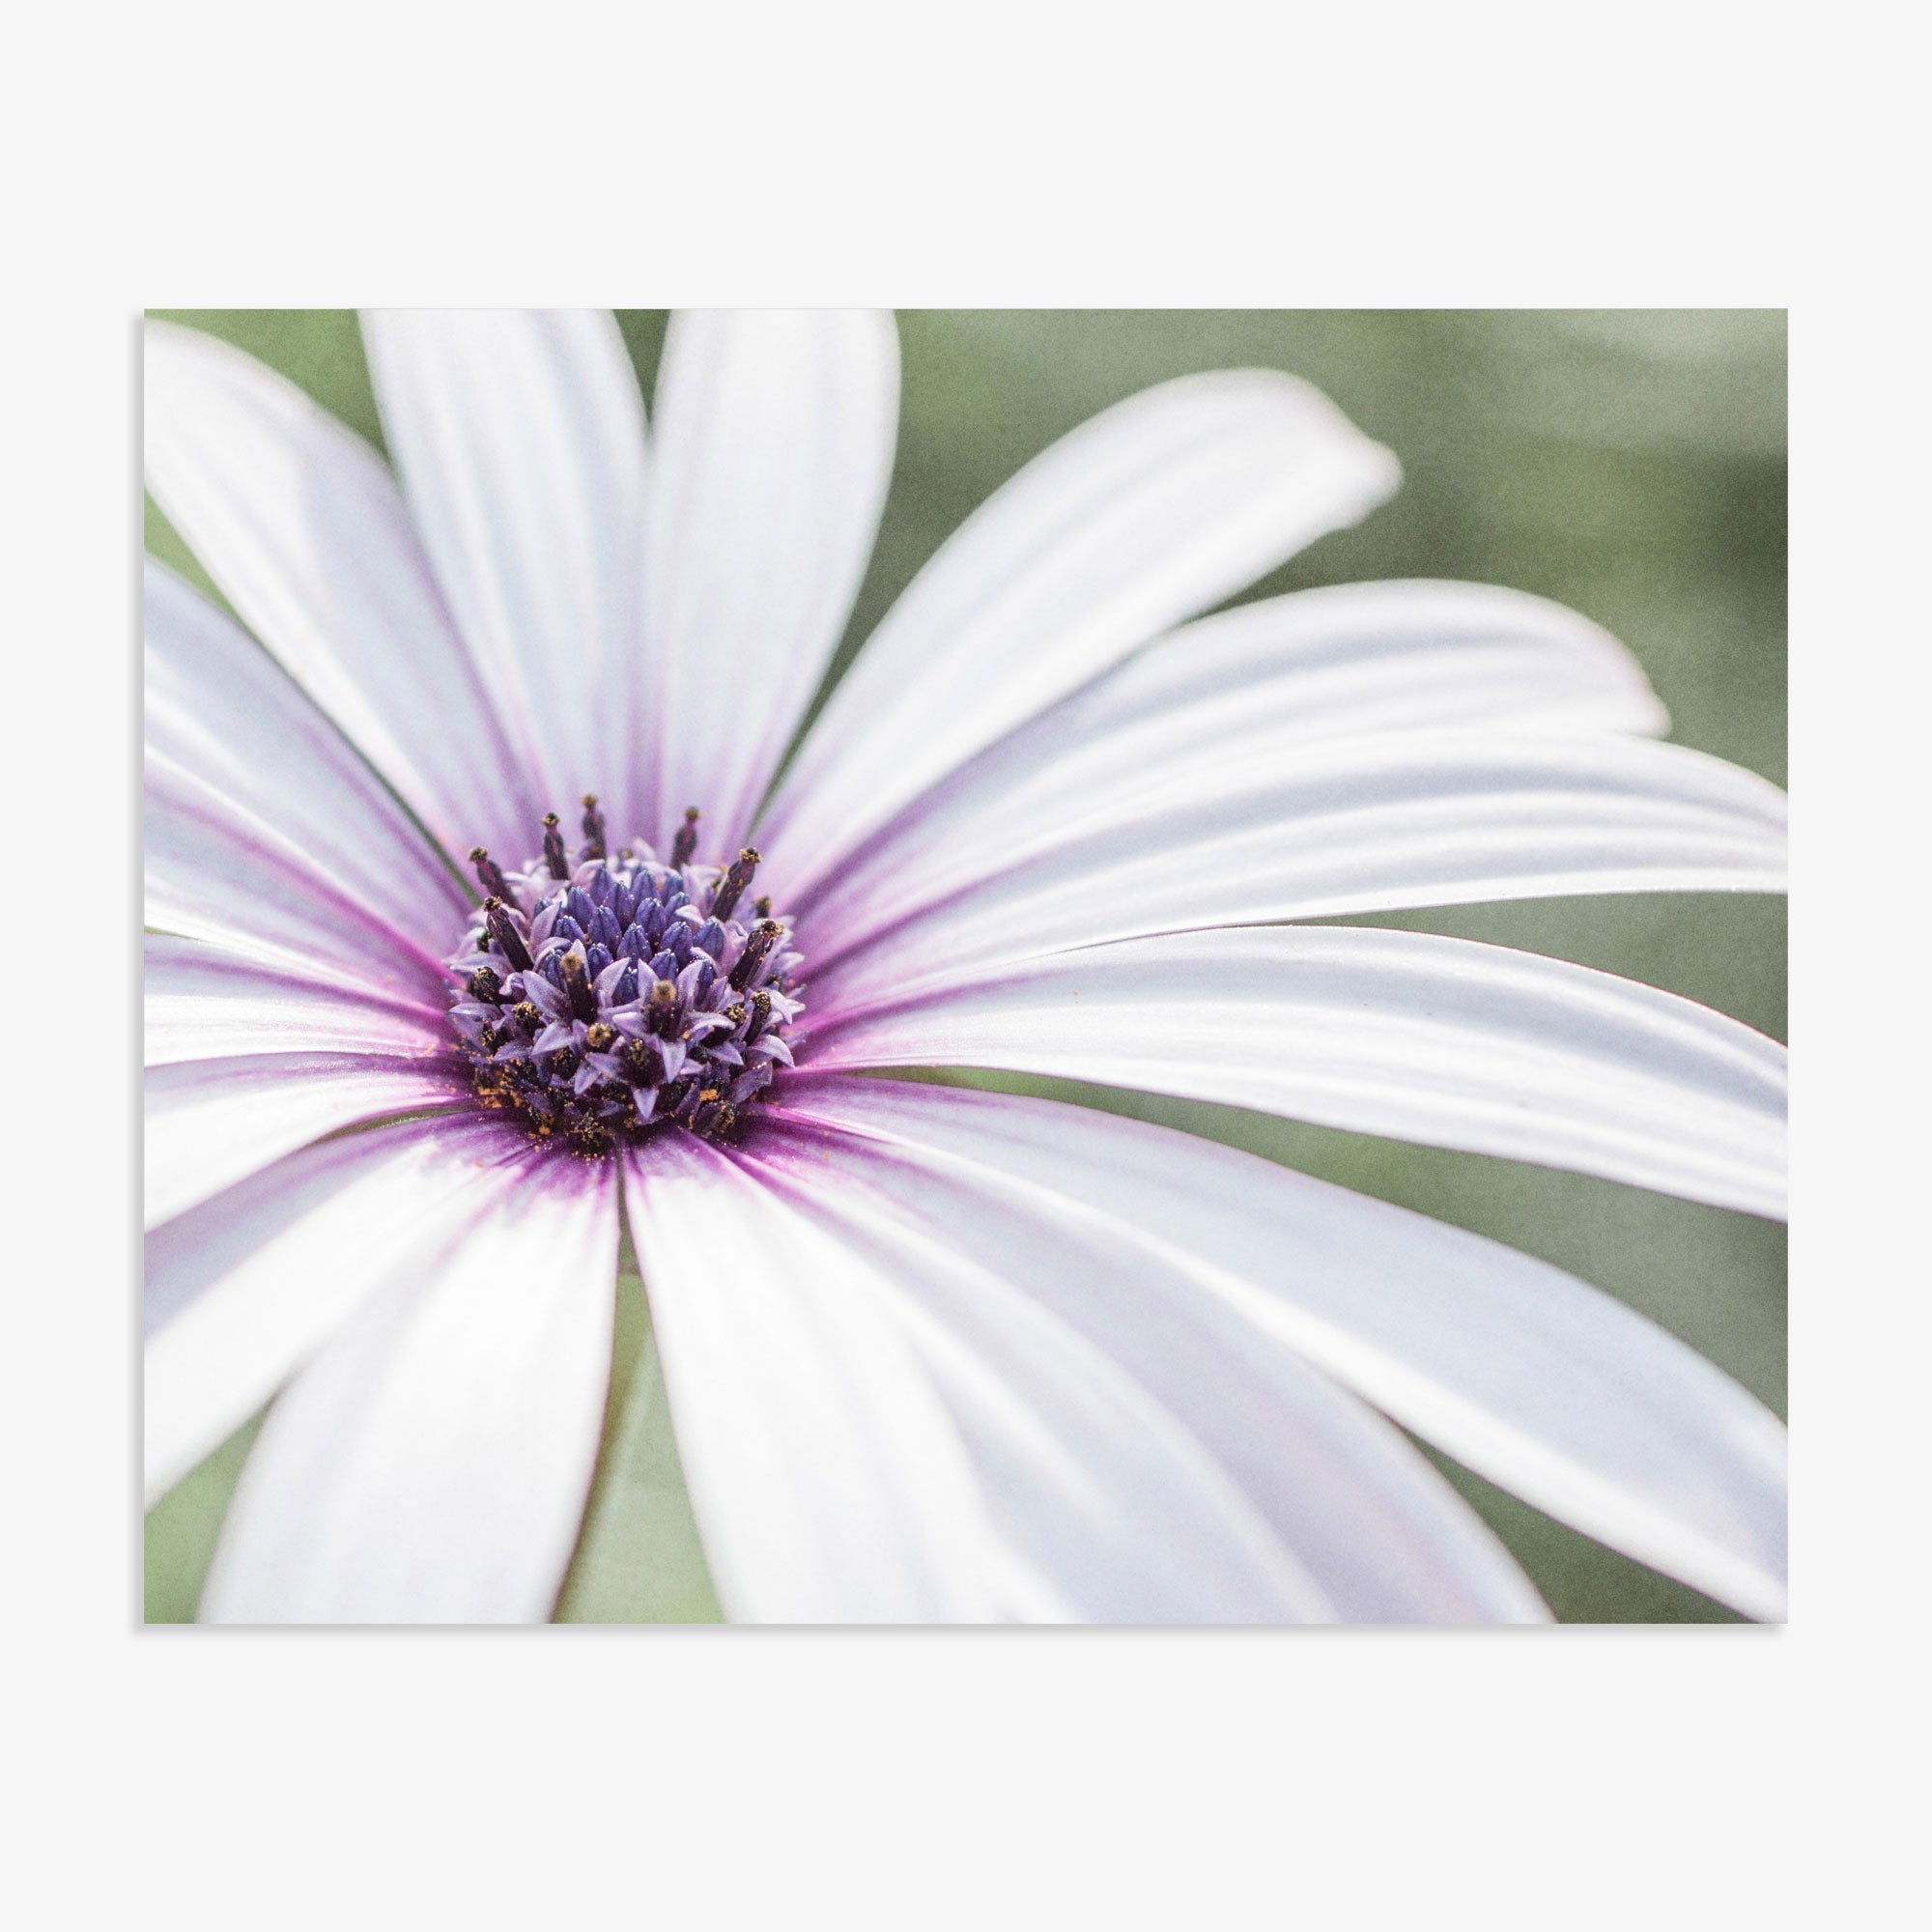 Close-up of a Large White Daisy Flower Print, &#39;Bed of Petals&#39; from Offley Green, displaying detailed purple stripes on its petals and a dark purple center against a soft, green background, captured in exquisite floral photography.